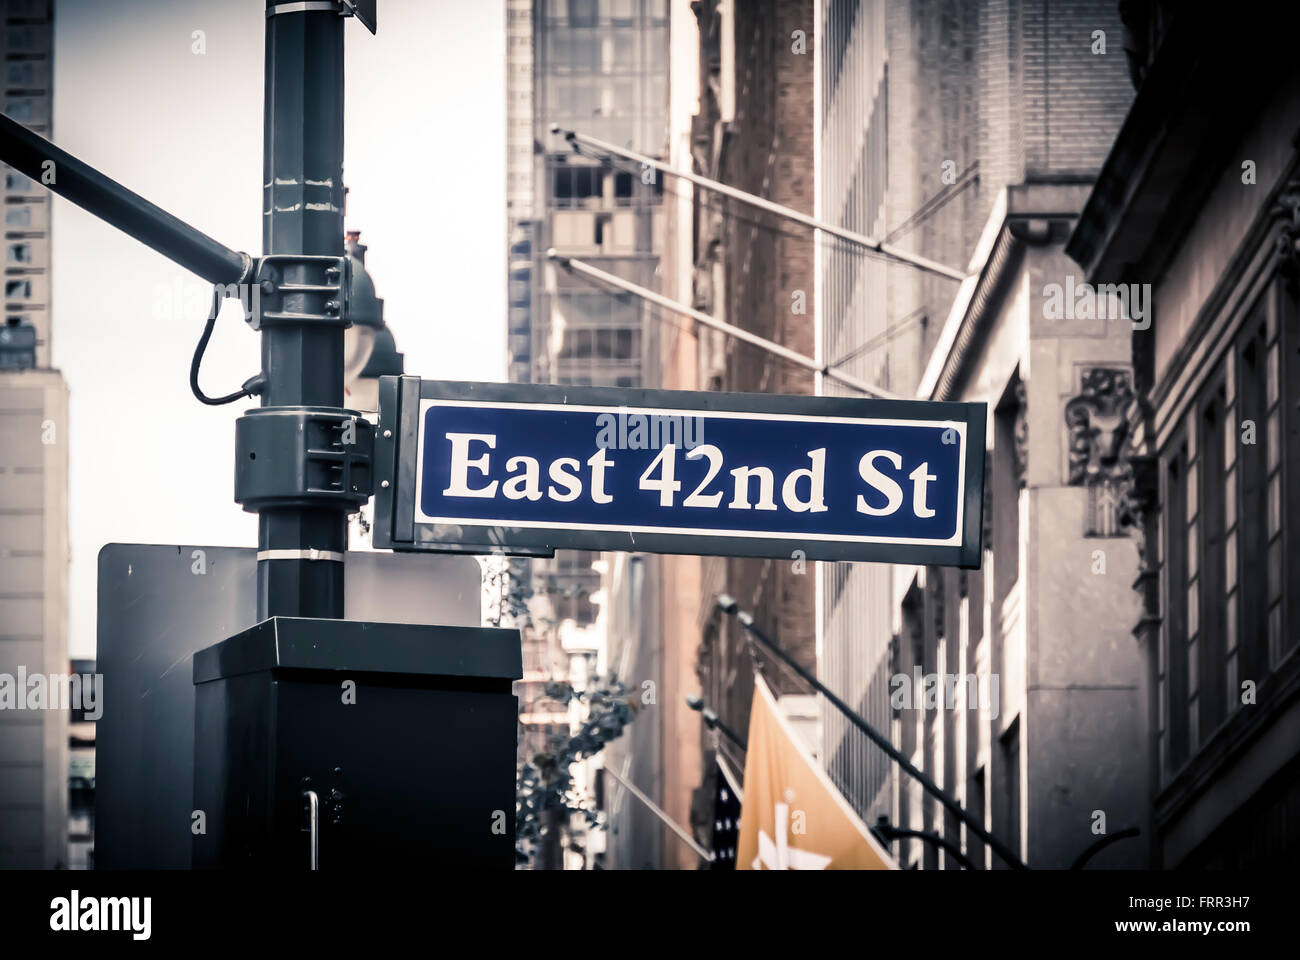 East 42nd Street sign, New York City, USA. Banque D'Images